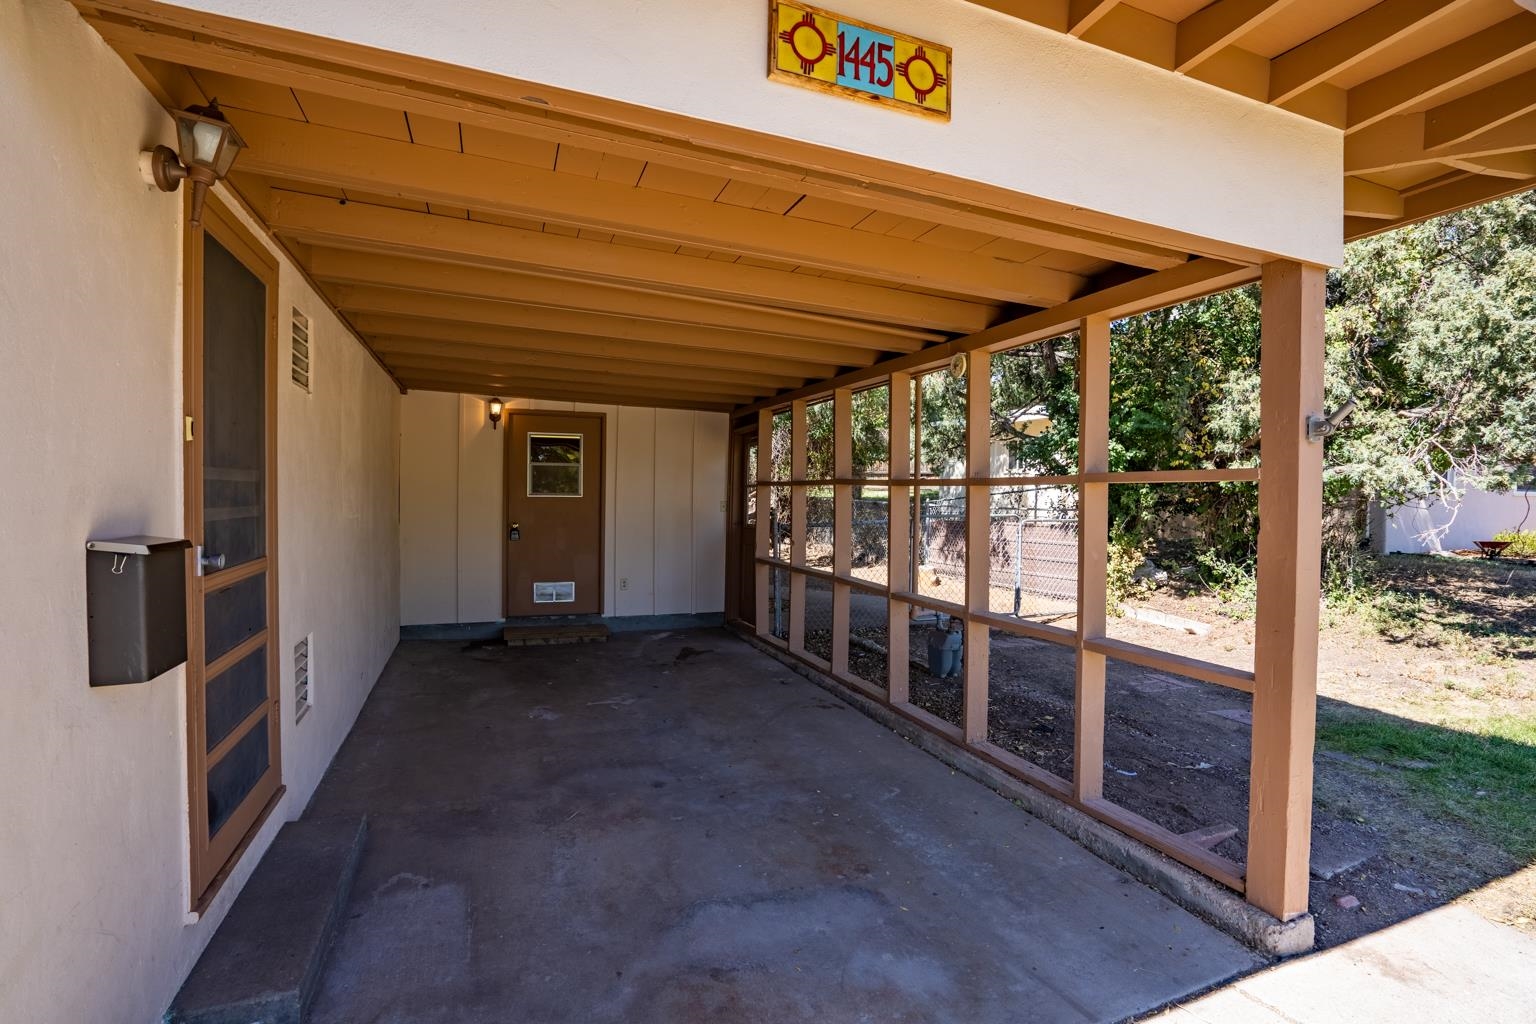 1445 42ND, Los Alamos, New Mexico 87544, 3 Bedrooms Bedrooms, ,2 BathroomsBathrooms,Residential,For Sale,1445 42ND,202104327